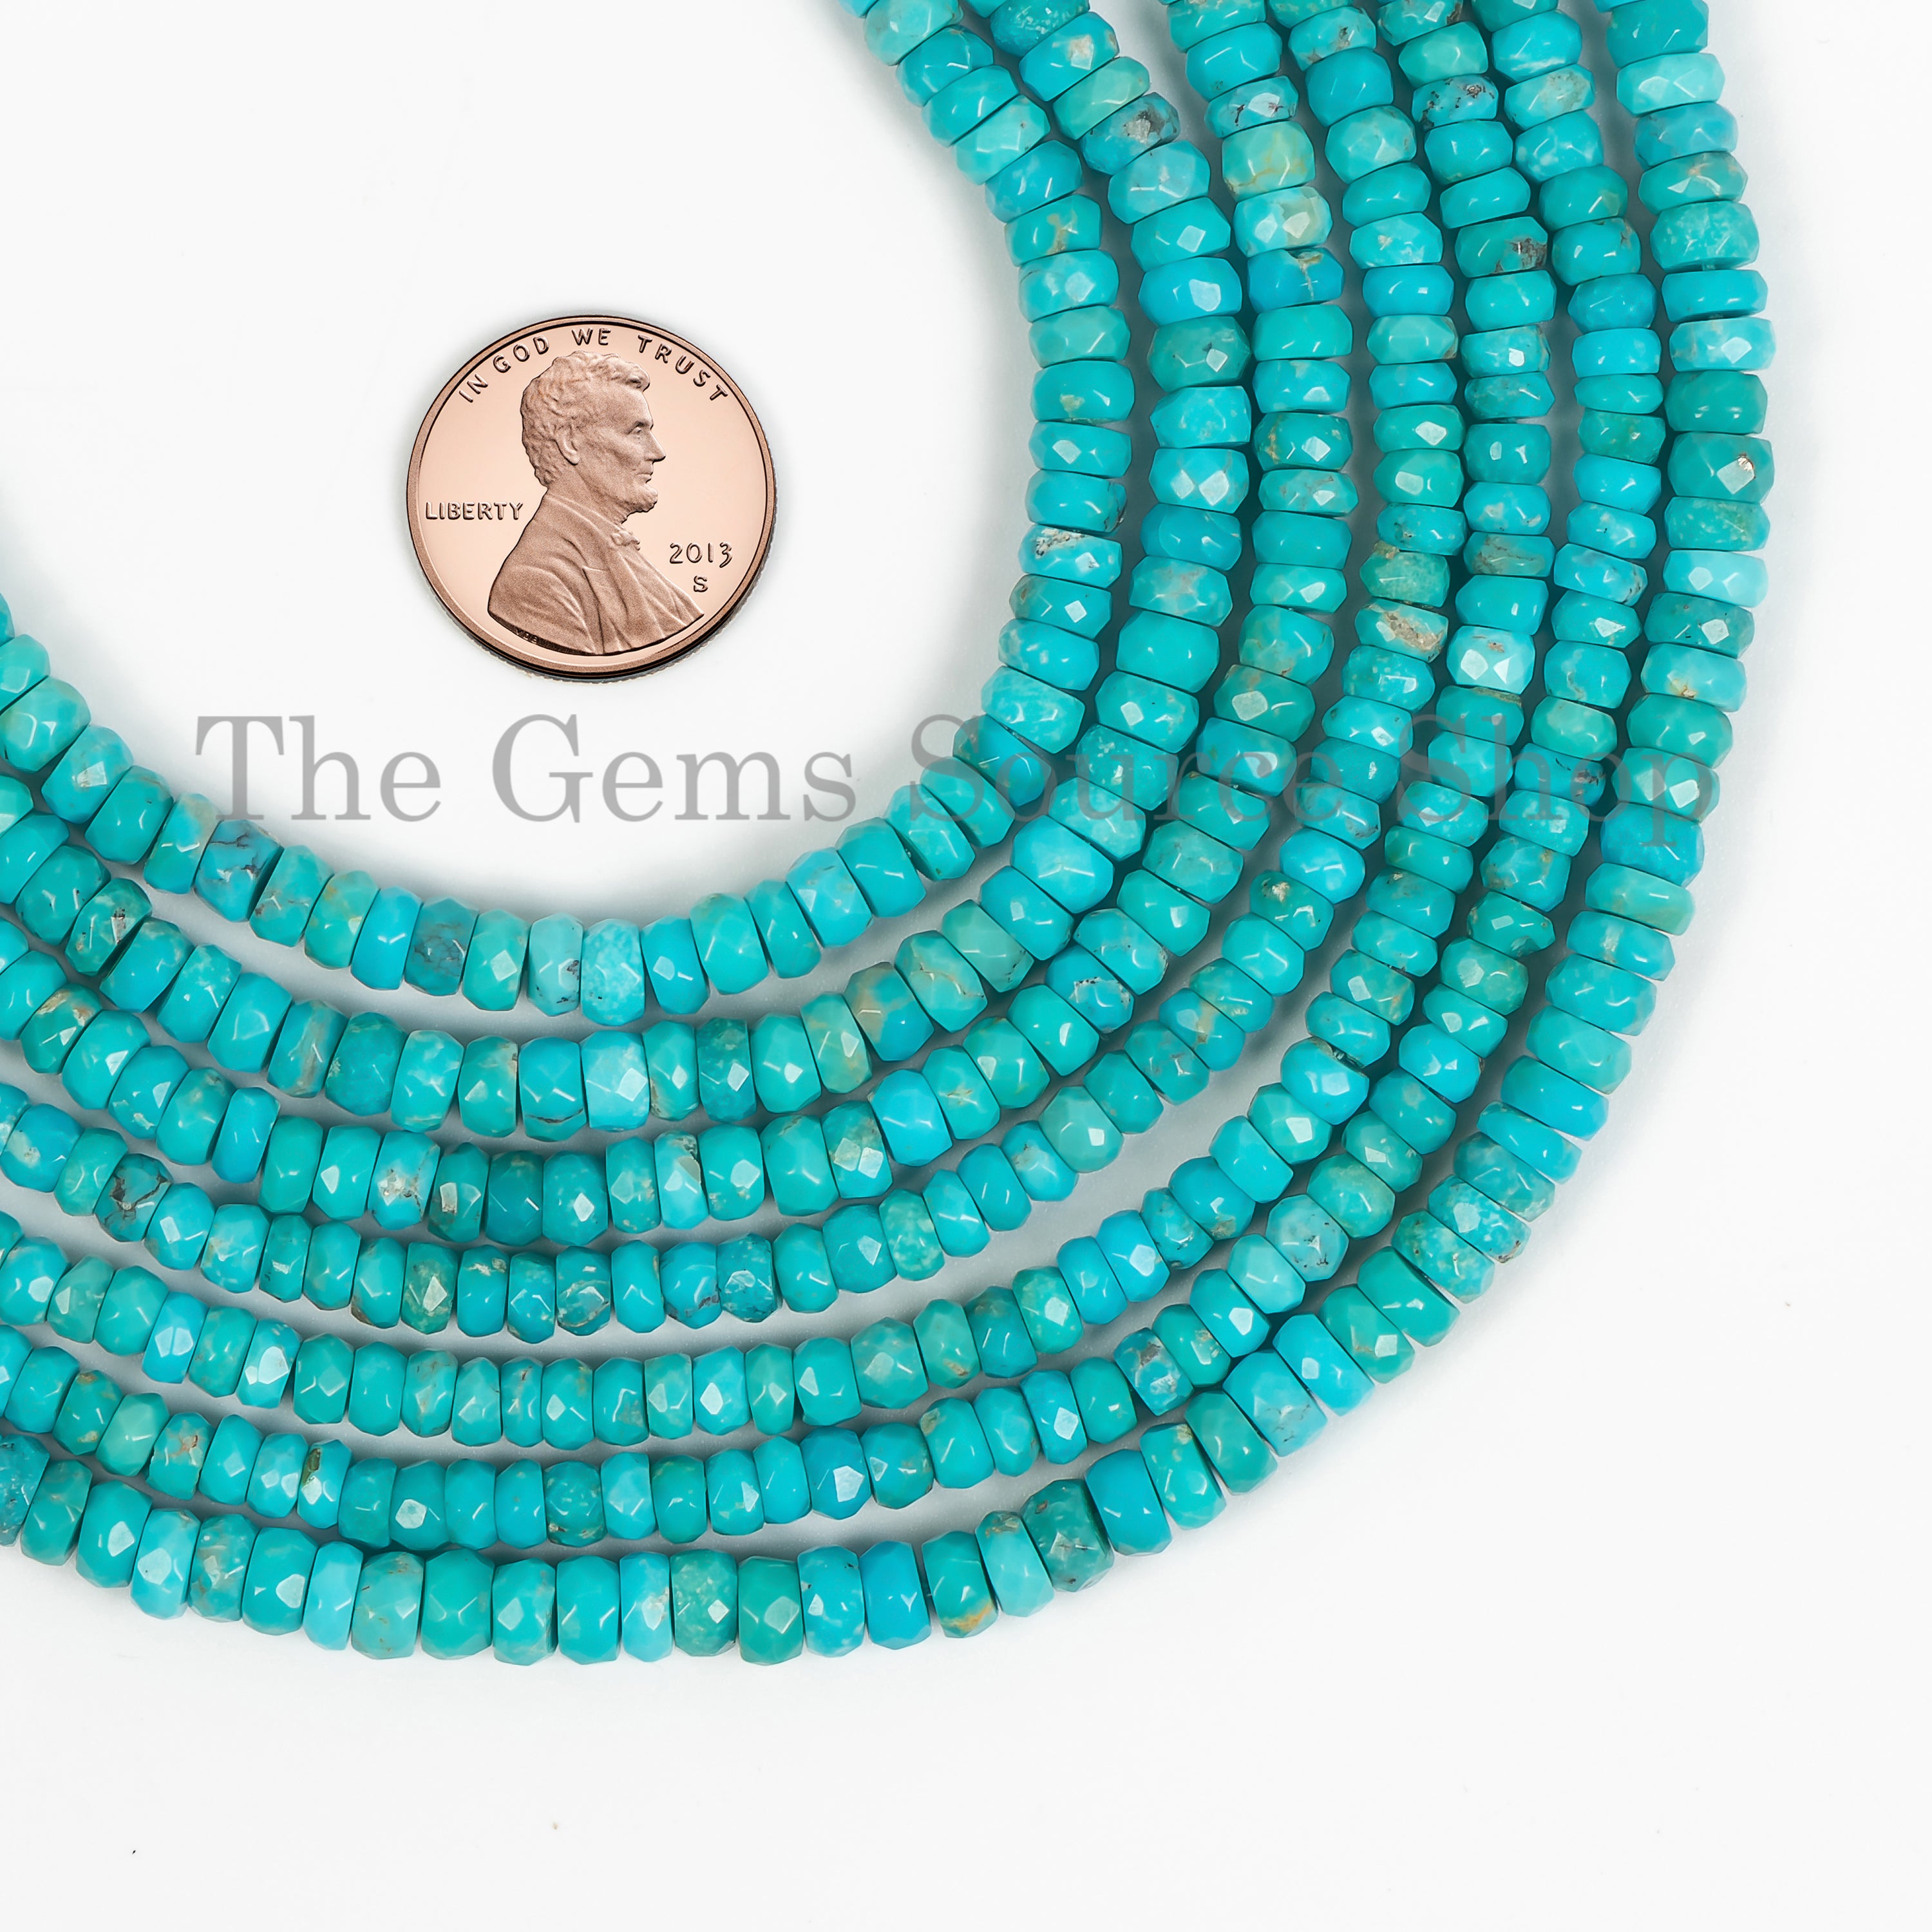 Natural Turquoise Beads, Turquoise Faceted Rondelle Beads, Turquoise Gemstone Beads